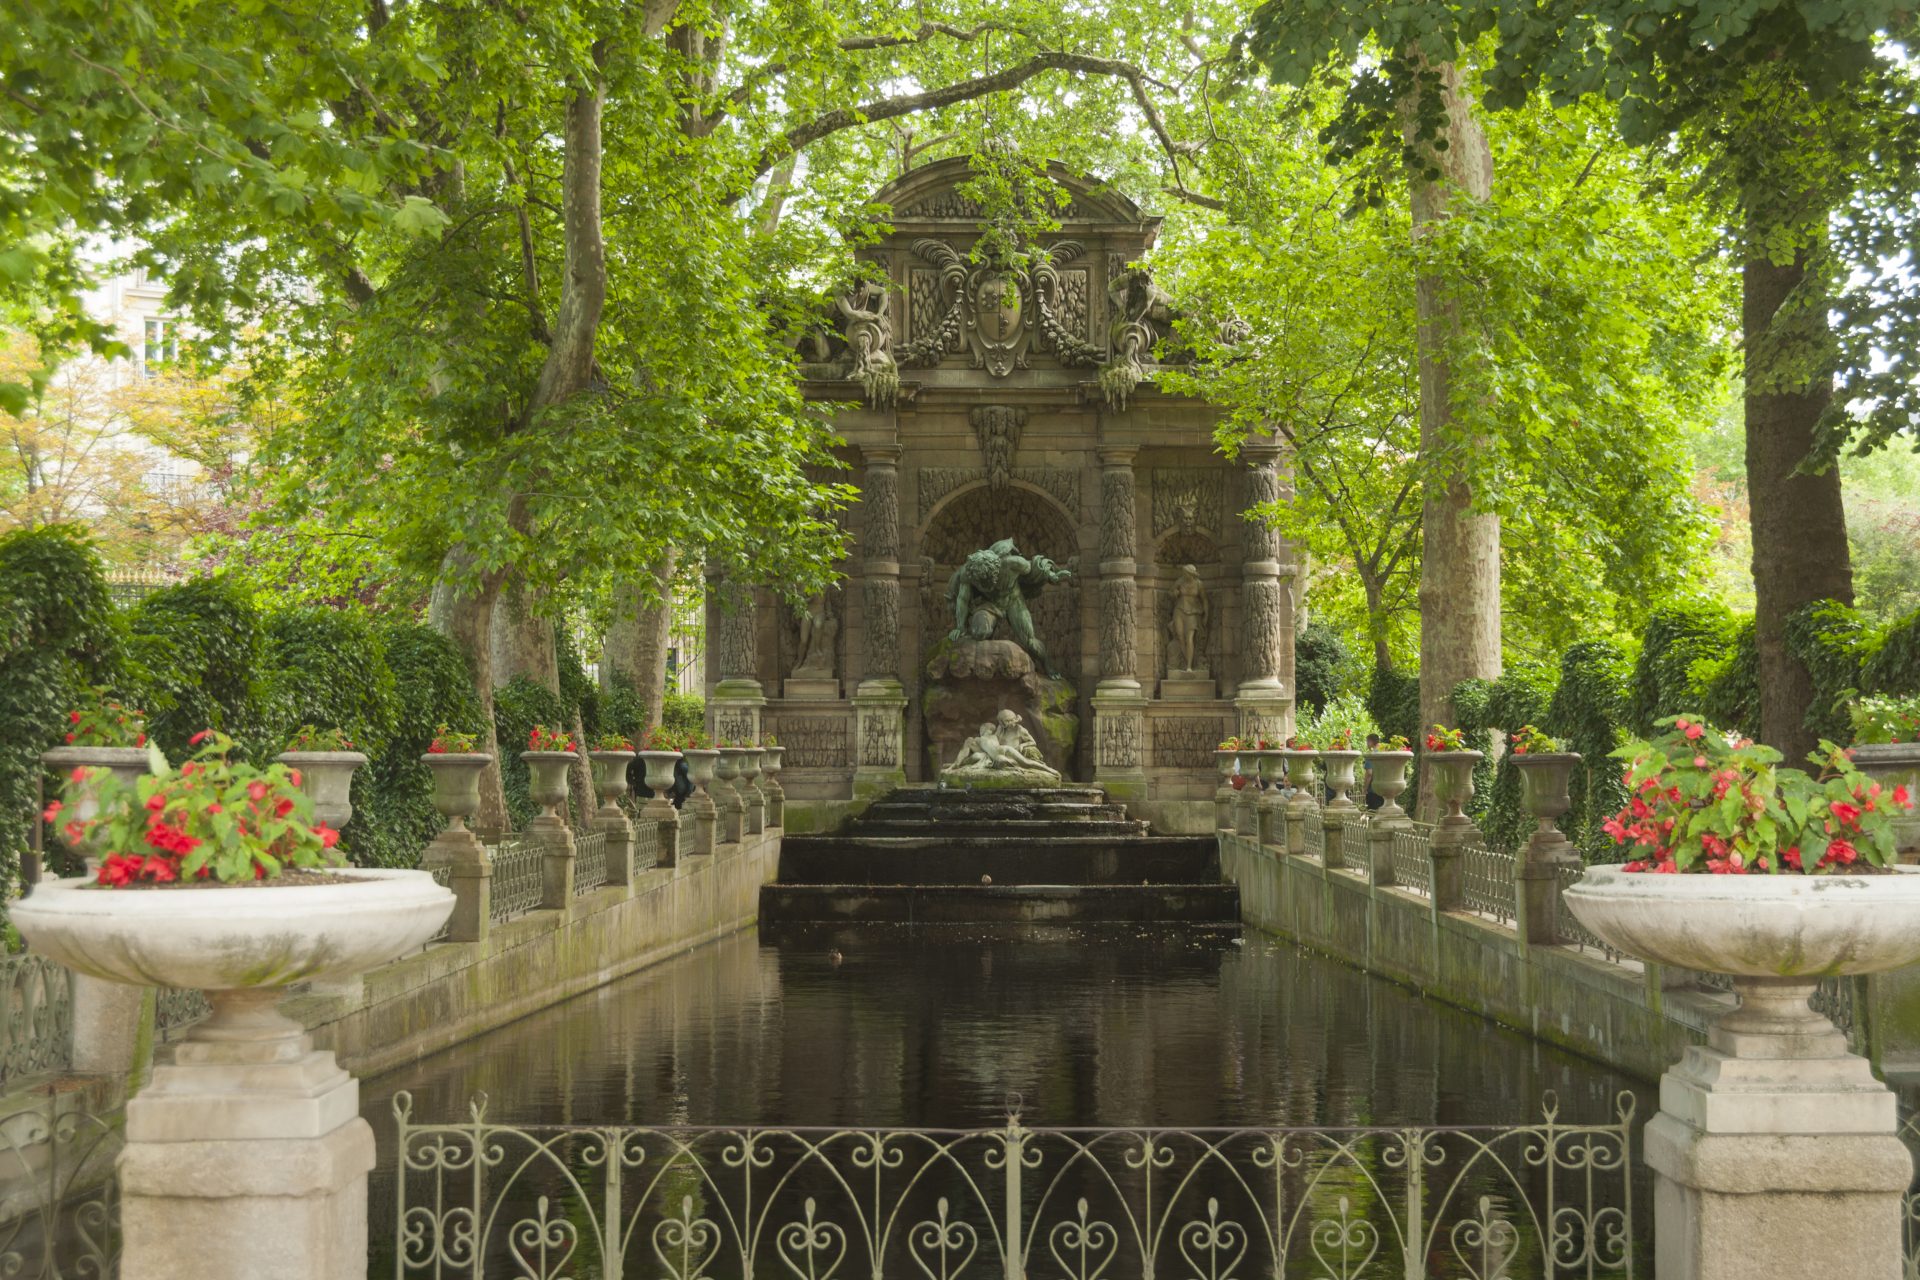 <p>The Luxembourg Gardens is one of Parisians' favorite parks. Wander through its sculptures and flowerbeds before taking a moment to rest in one of its famous green chairs. In the photo, the Medici Fountain, built around 1630, evokes the spirit of the Italian Renaissance.</p>